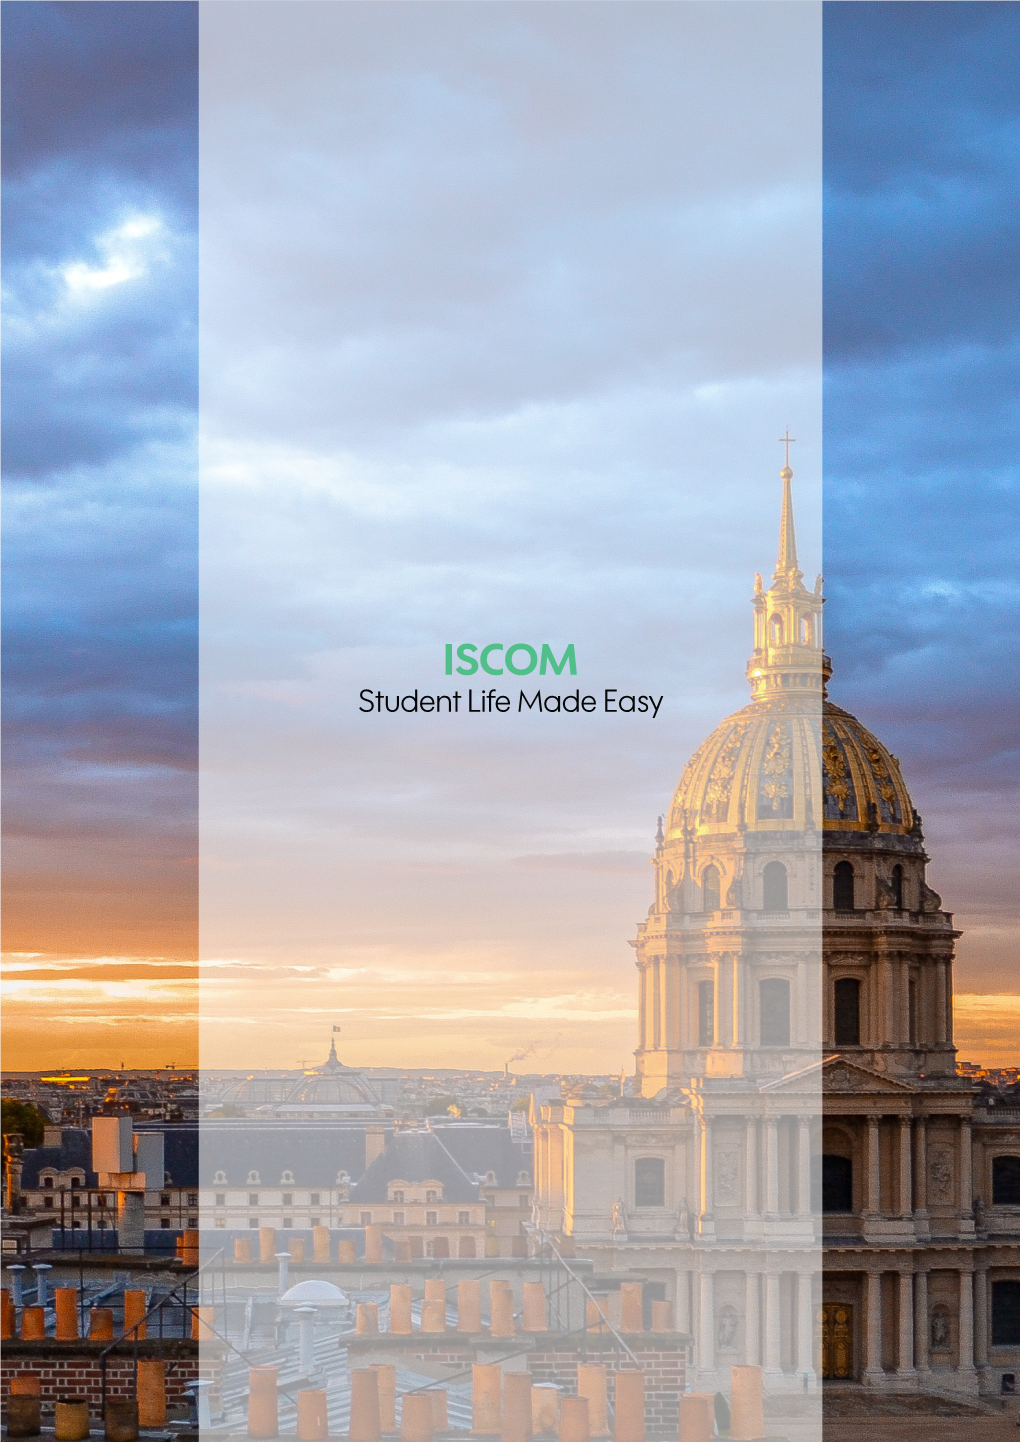 ISCOM Student Life Made Easy Student Residences in Paris